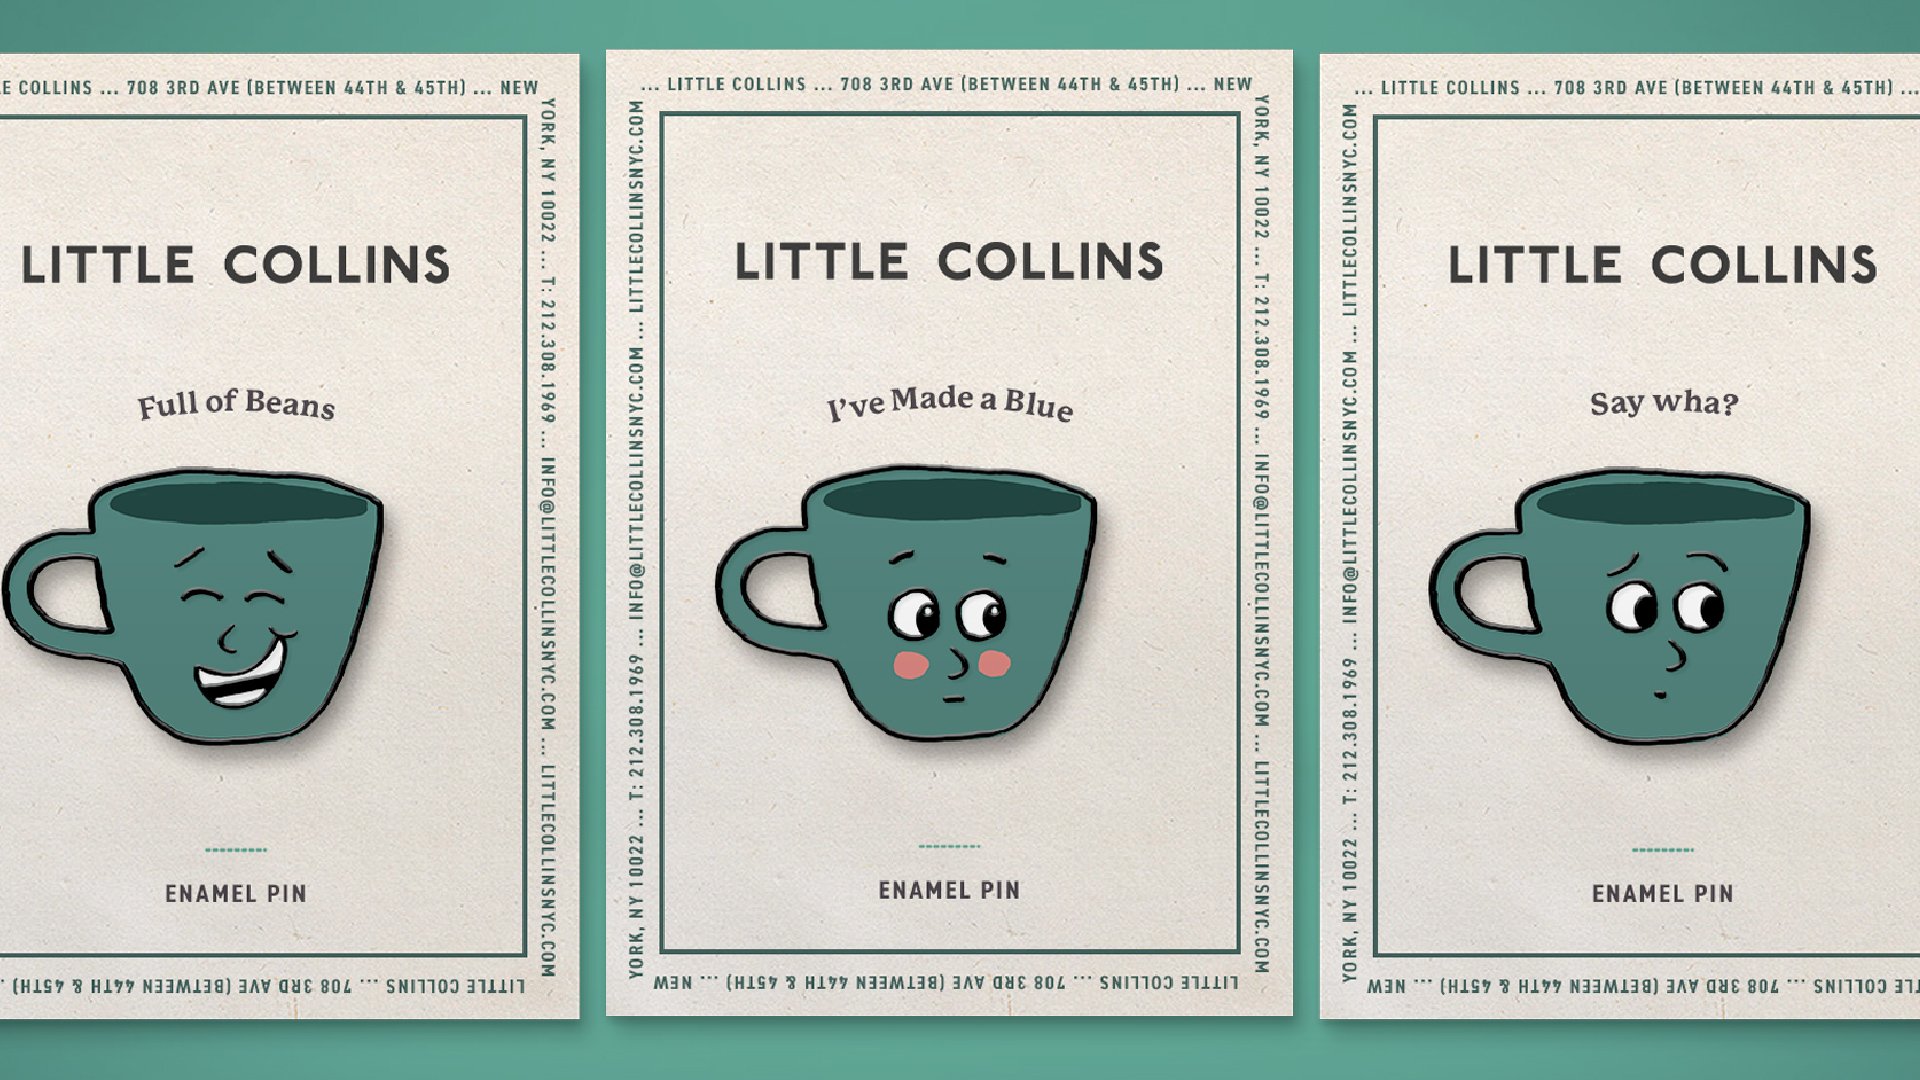 Three enamel pins feature the different emotions of Collin. Each pin has a cardboard panel with the words “Little Collins” followed by phrases that vary depending on Collin’s facial expression.